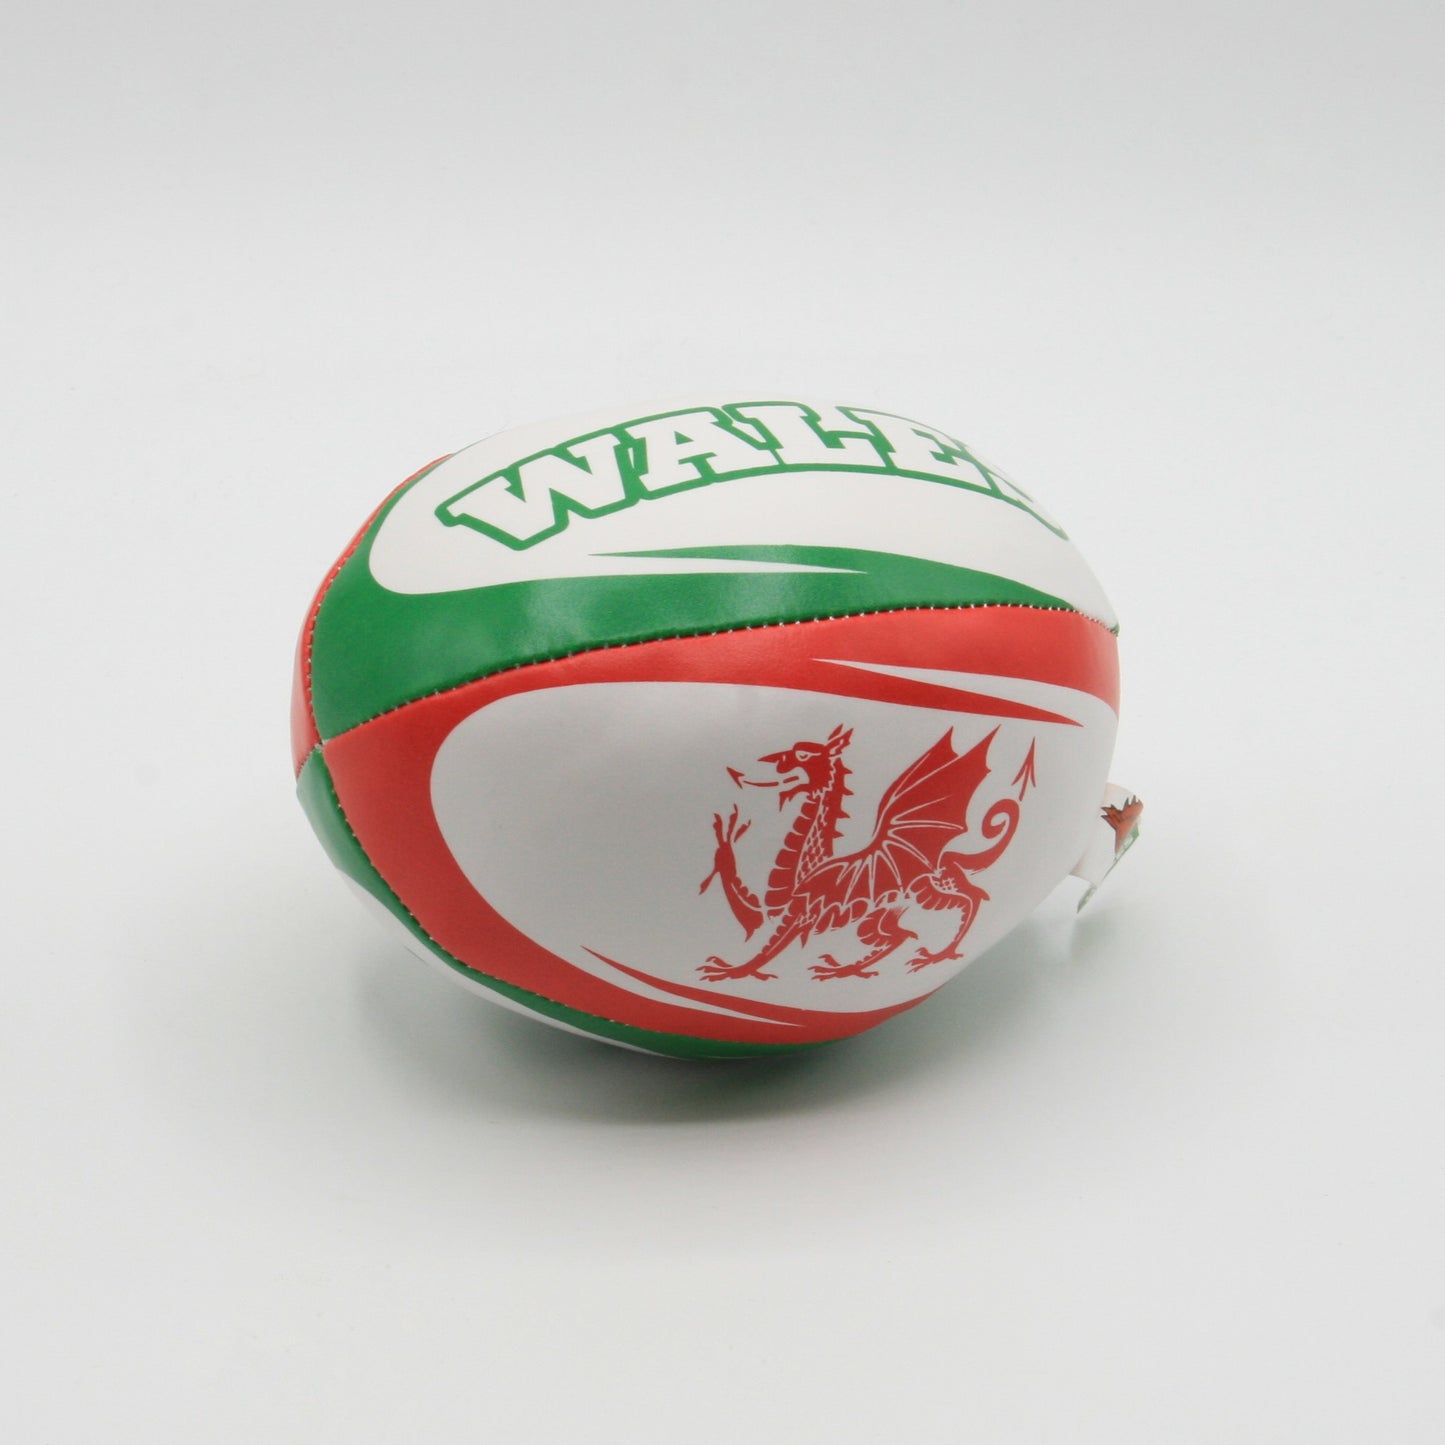 Miniature Soft Rugby Ball